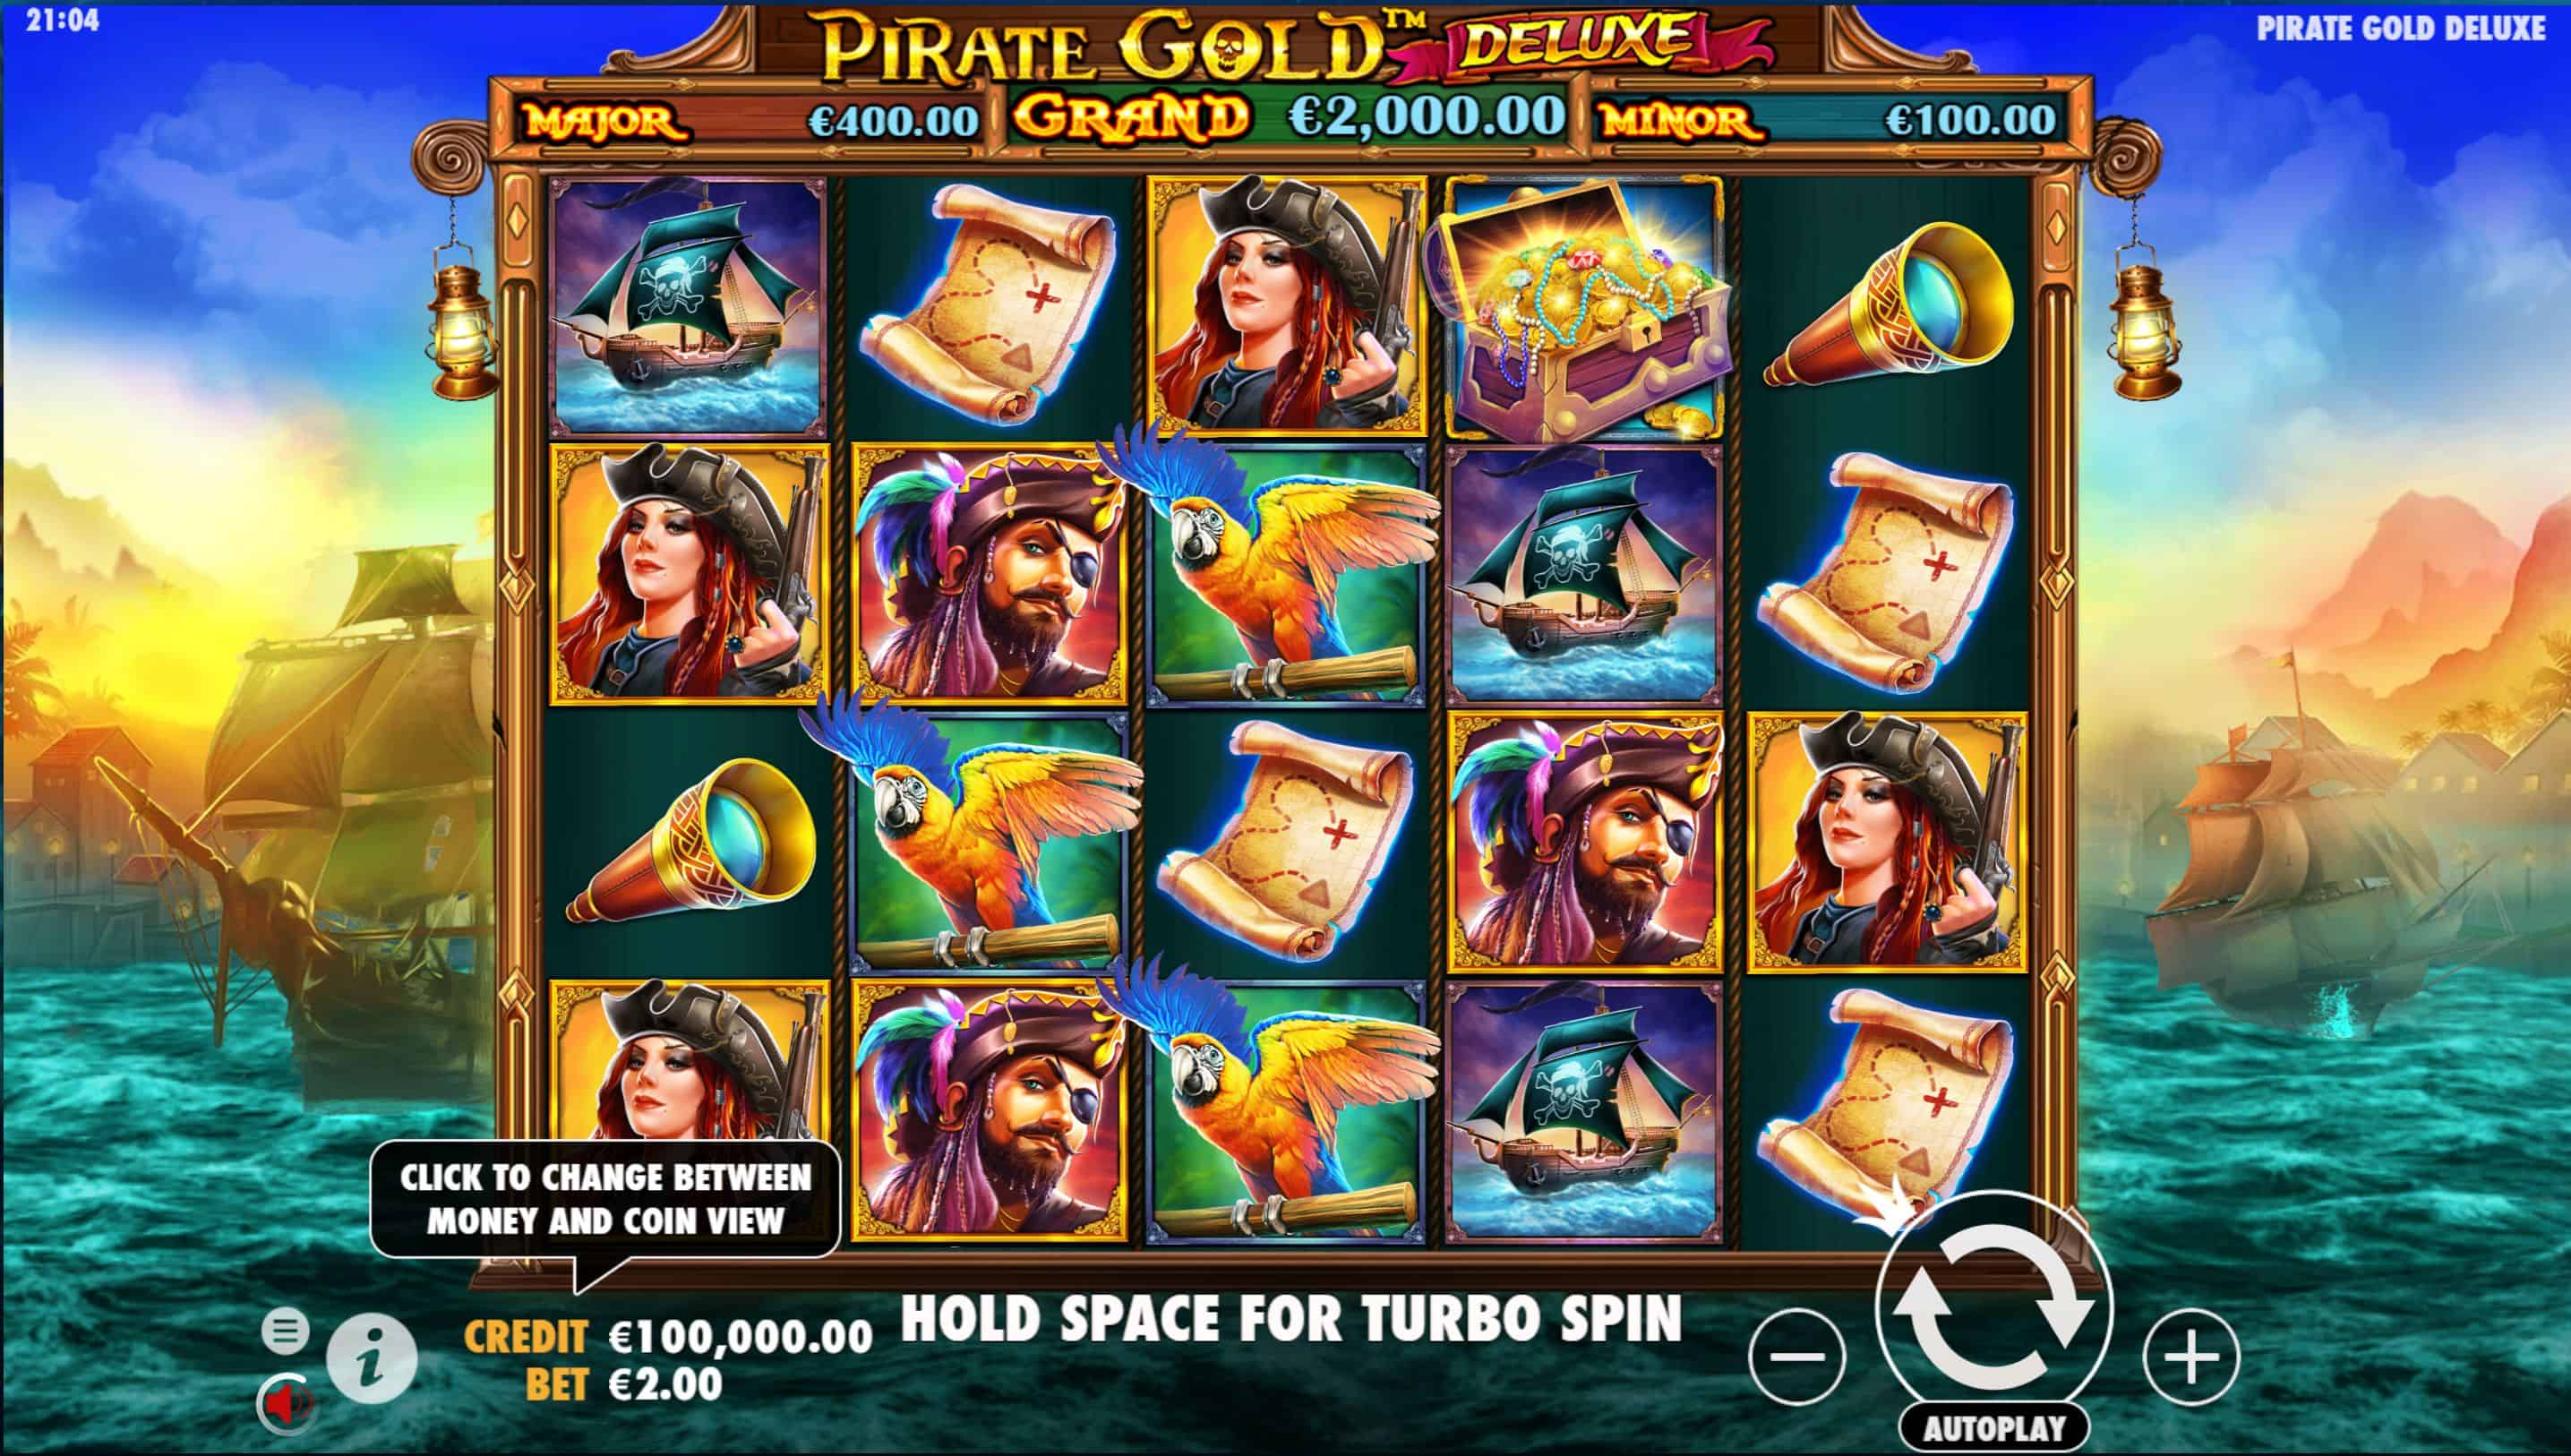 Pirate Gold Deluxe Slot Game Free Play at Casino Ireland 01